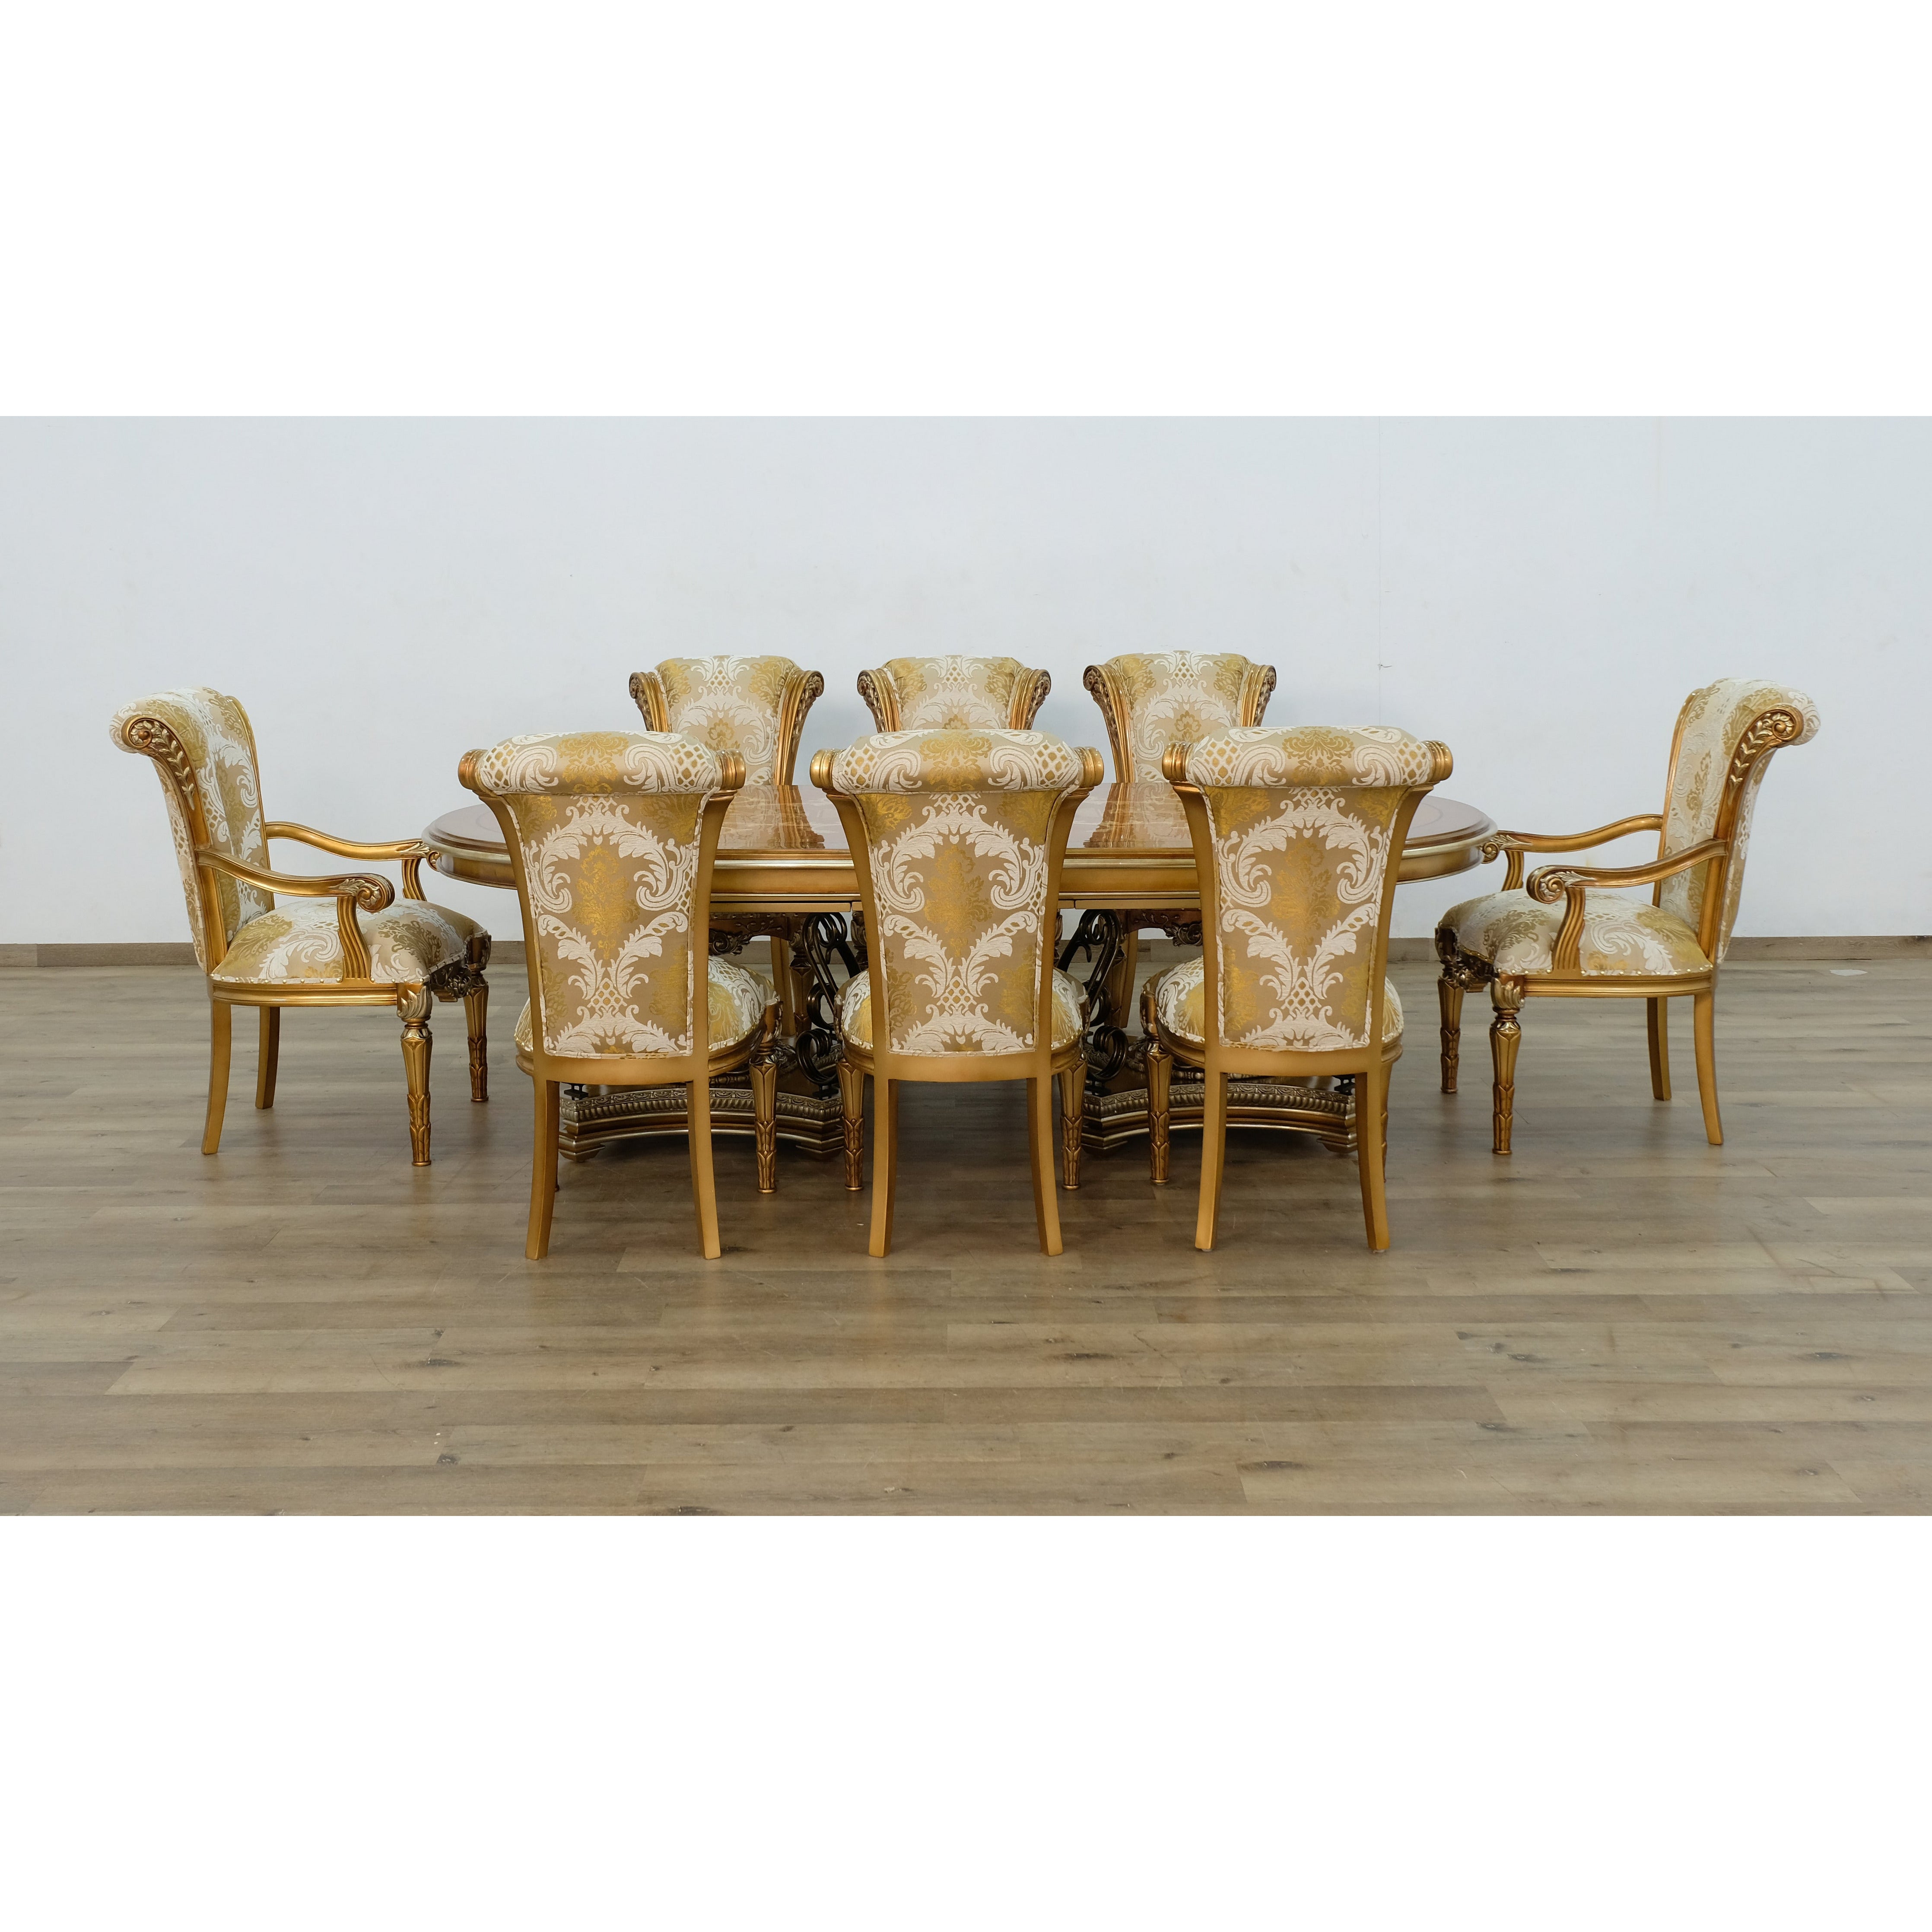 European Furniture - Valentina 9 Piece Dining Room Set With Damask Fabric Chair - 51955-61957-9SET - New Star Living